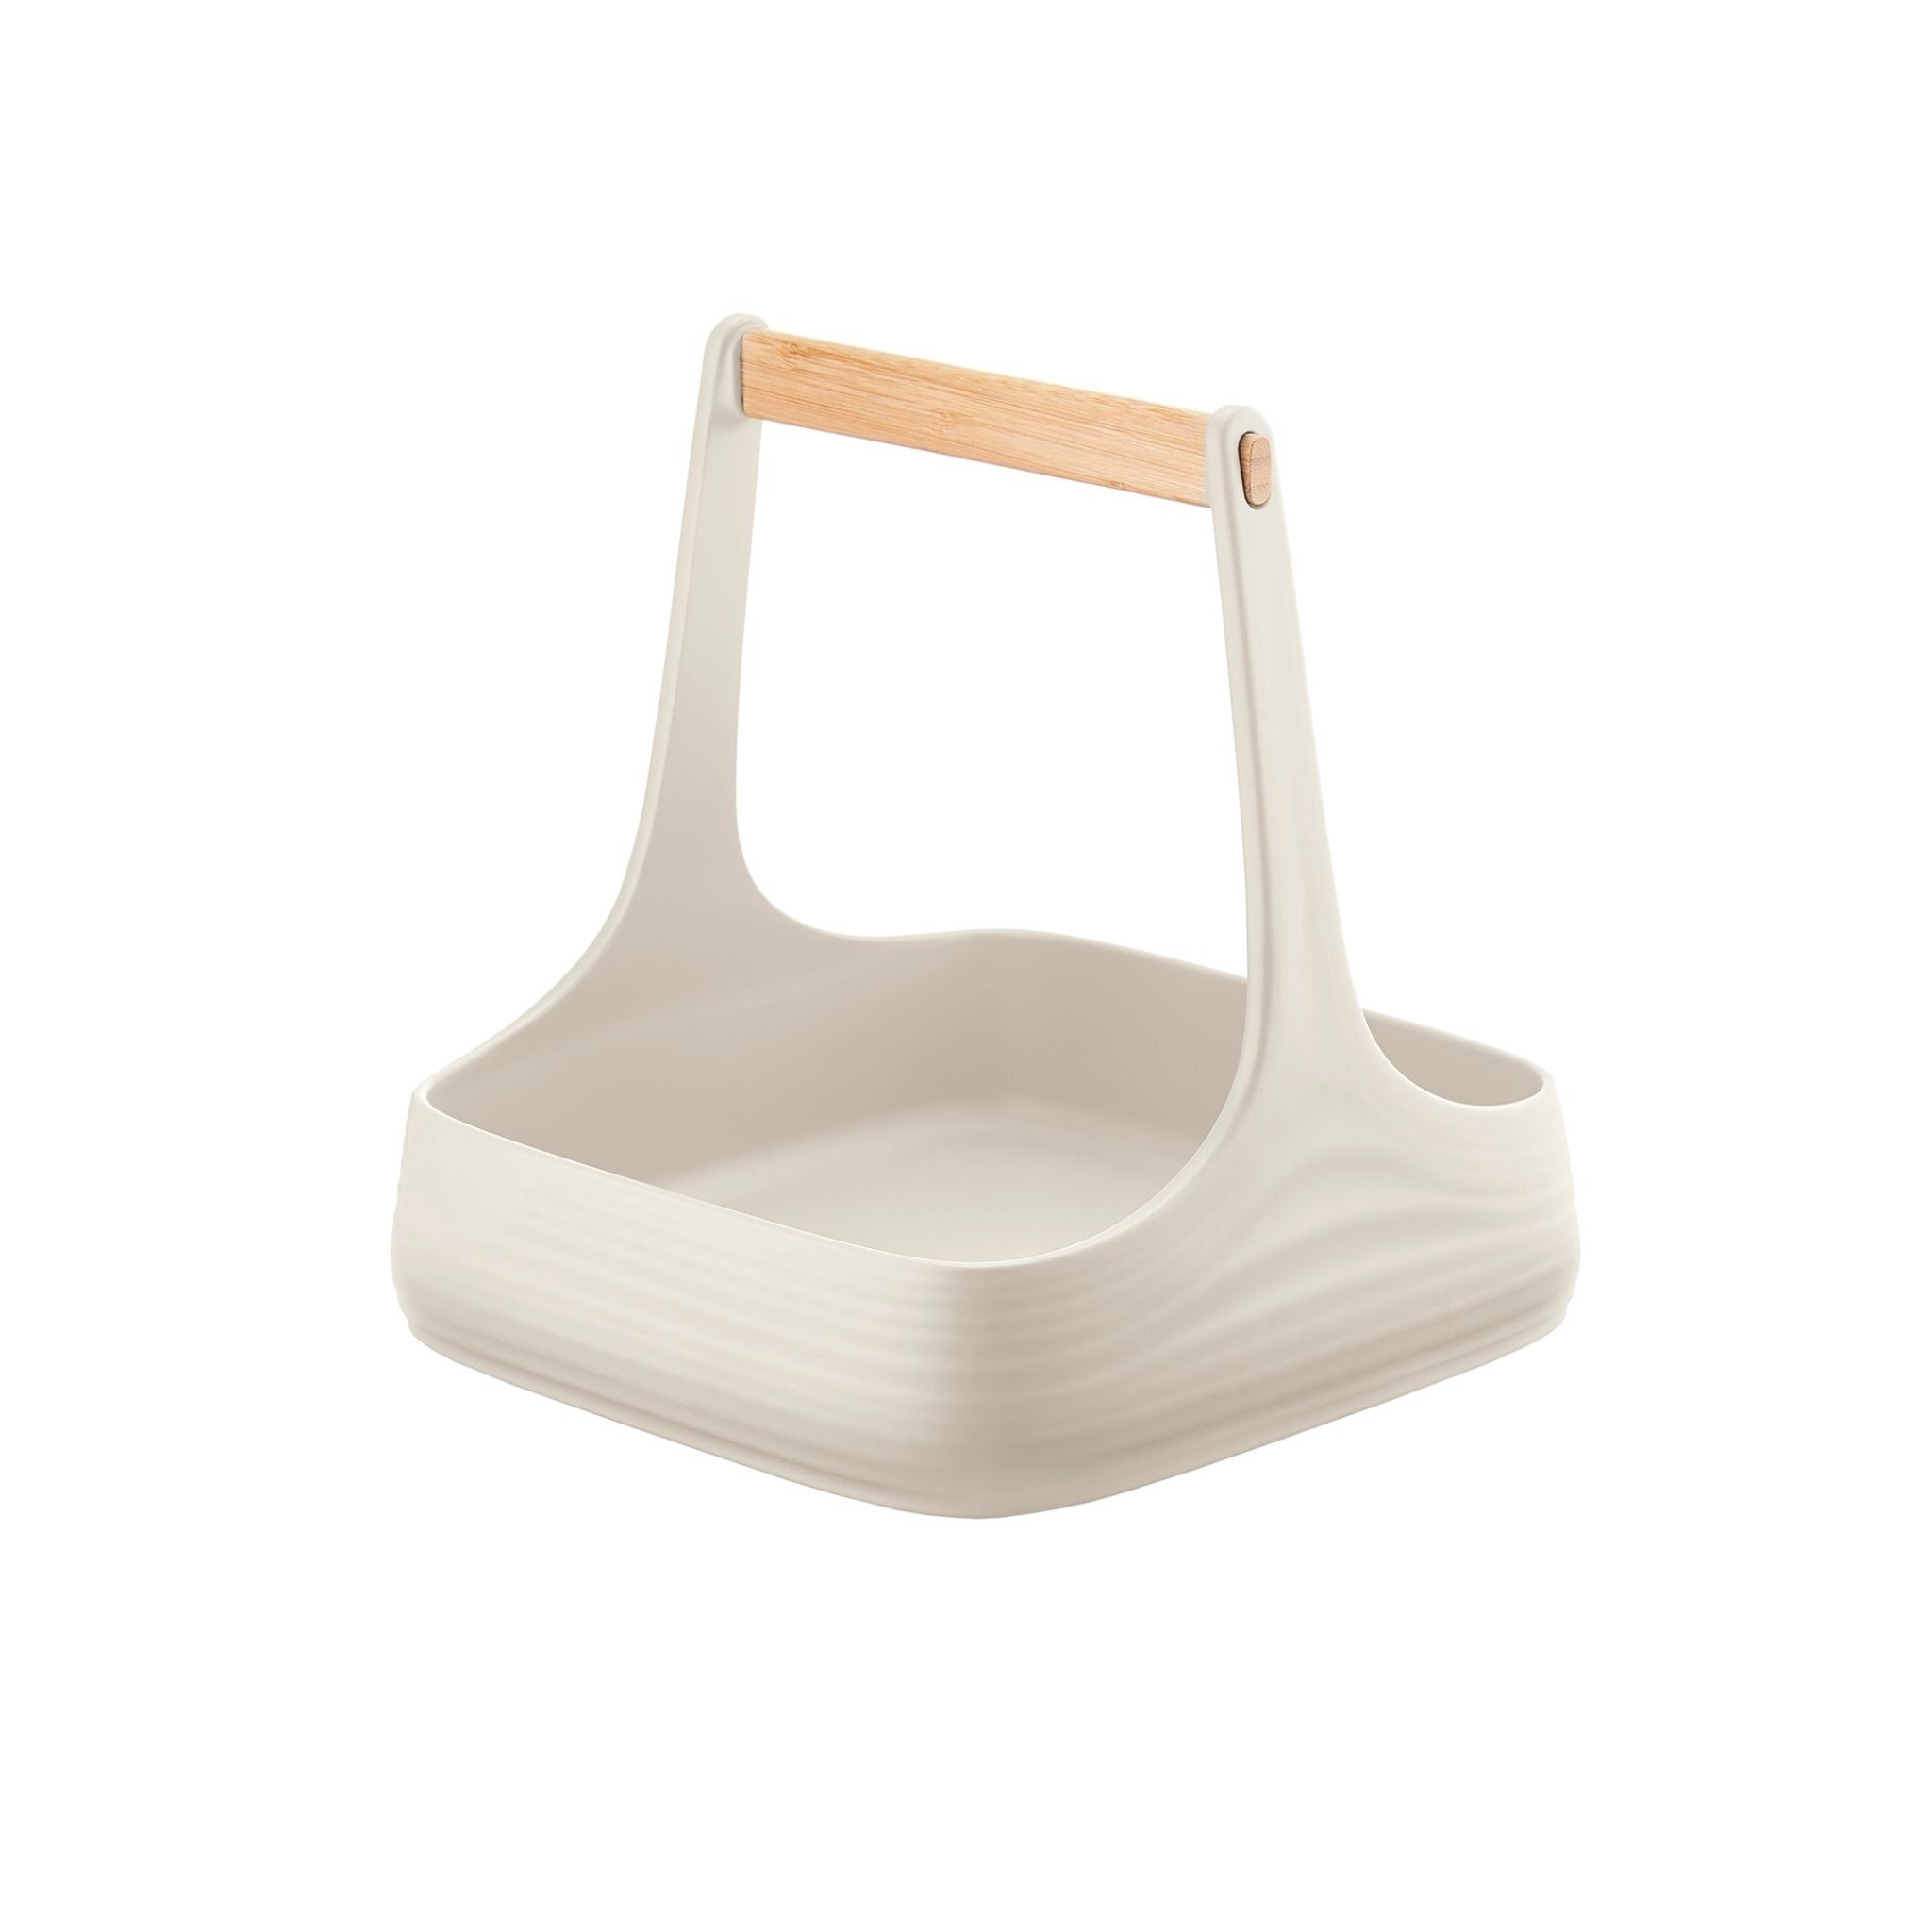 Tierra All Together Table Caddy by Guzzini - 2 colours